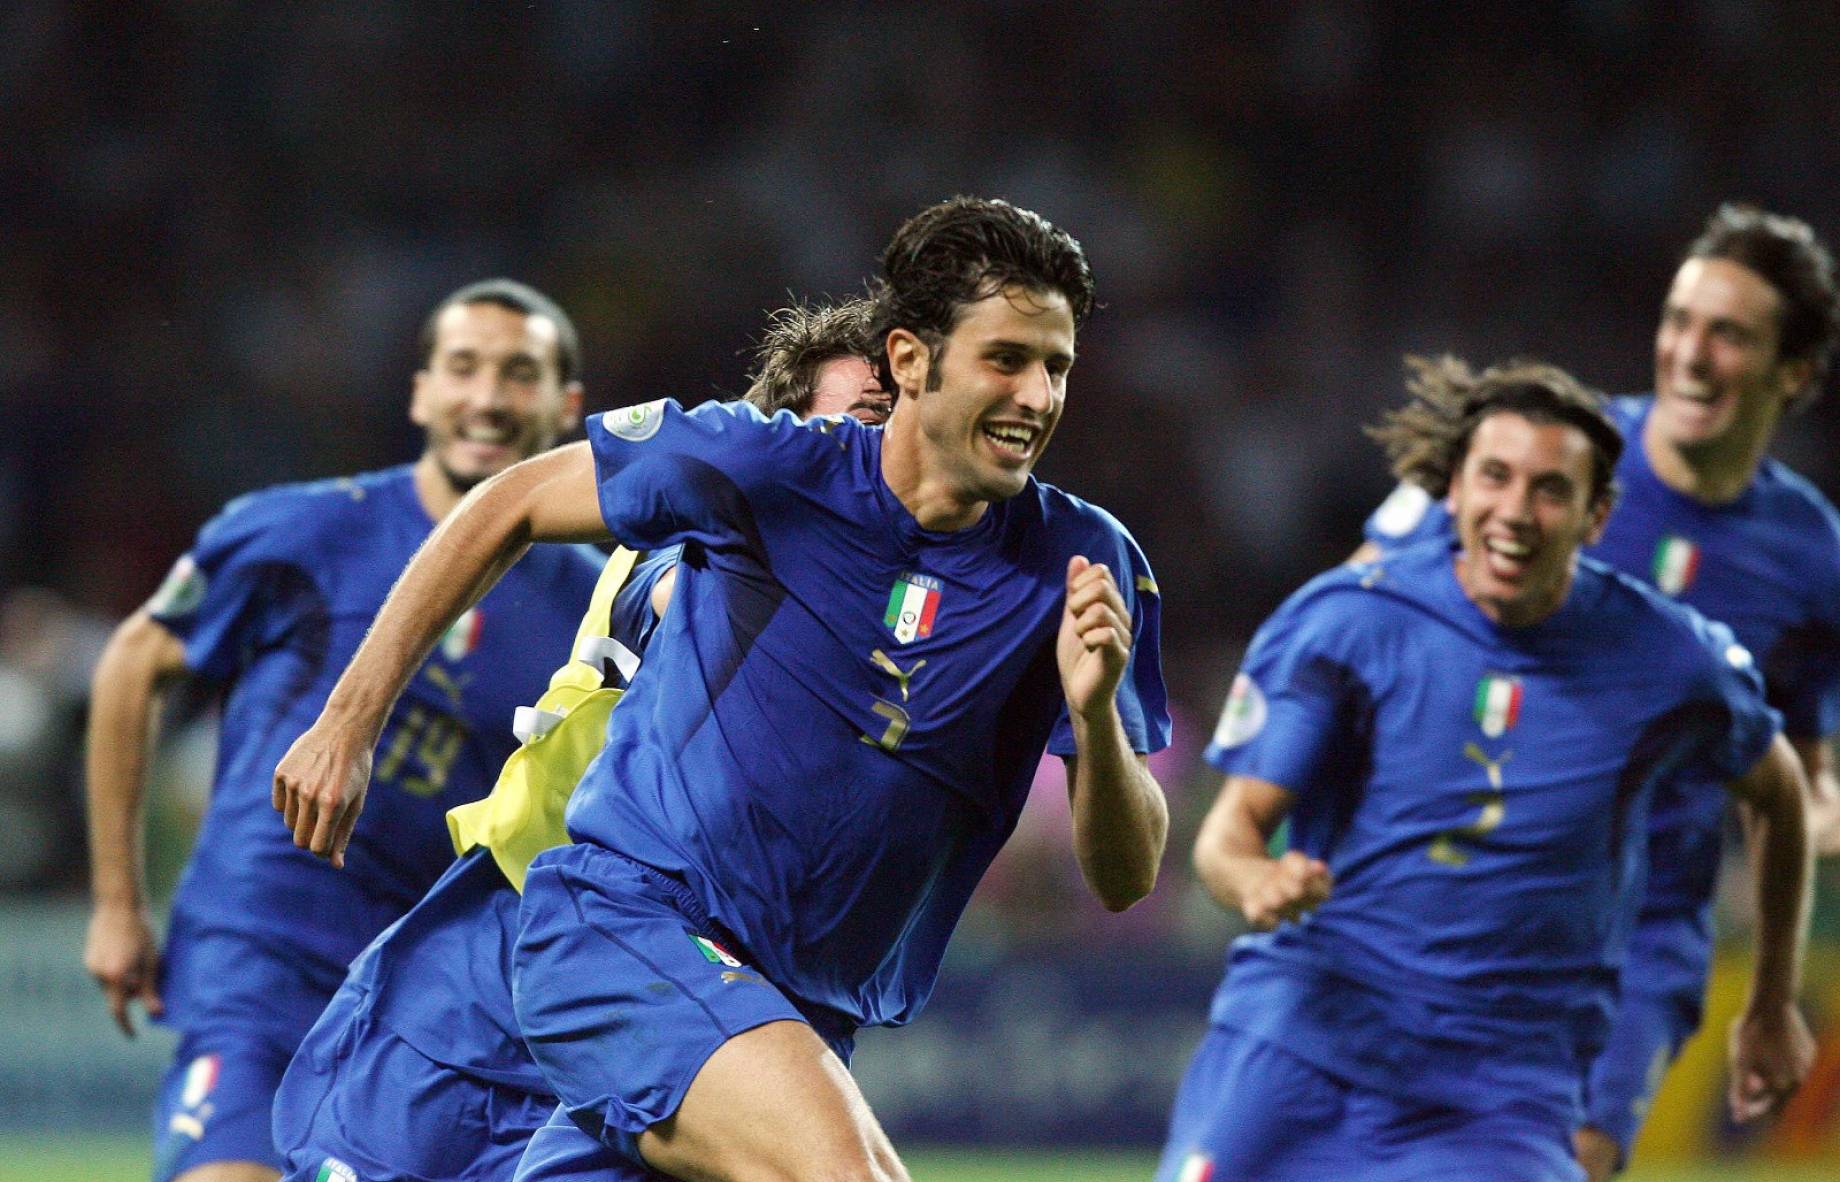 Defender Fabio Grosso is the man who in 2006 led Italy to their 4th world title, despite not being part of coach Marcello Lippi's initial lineup